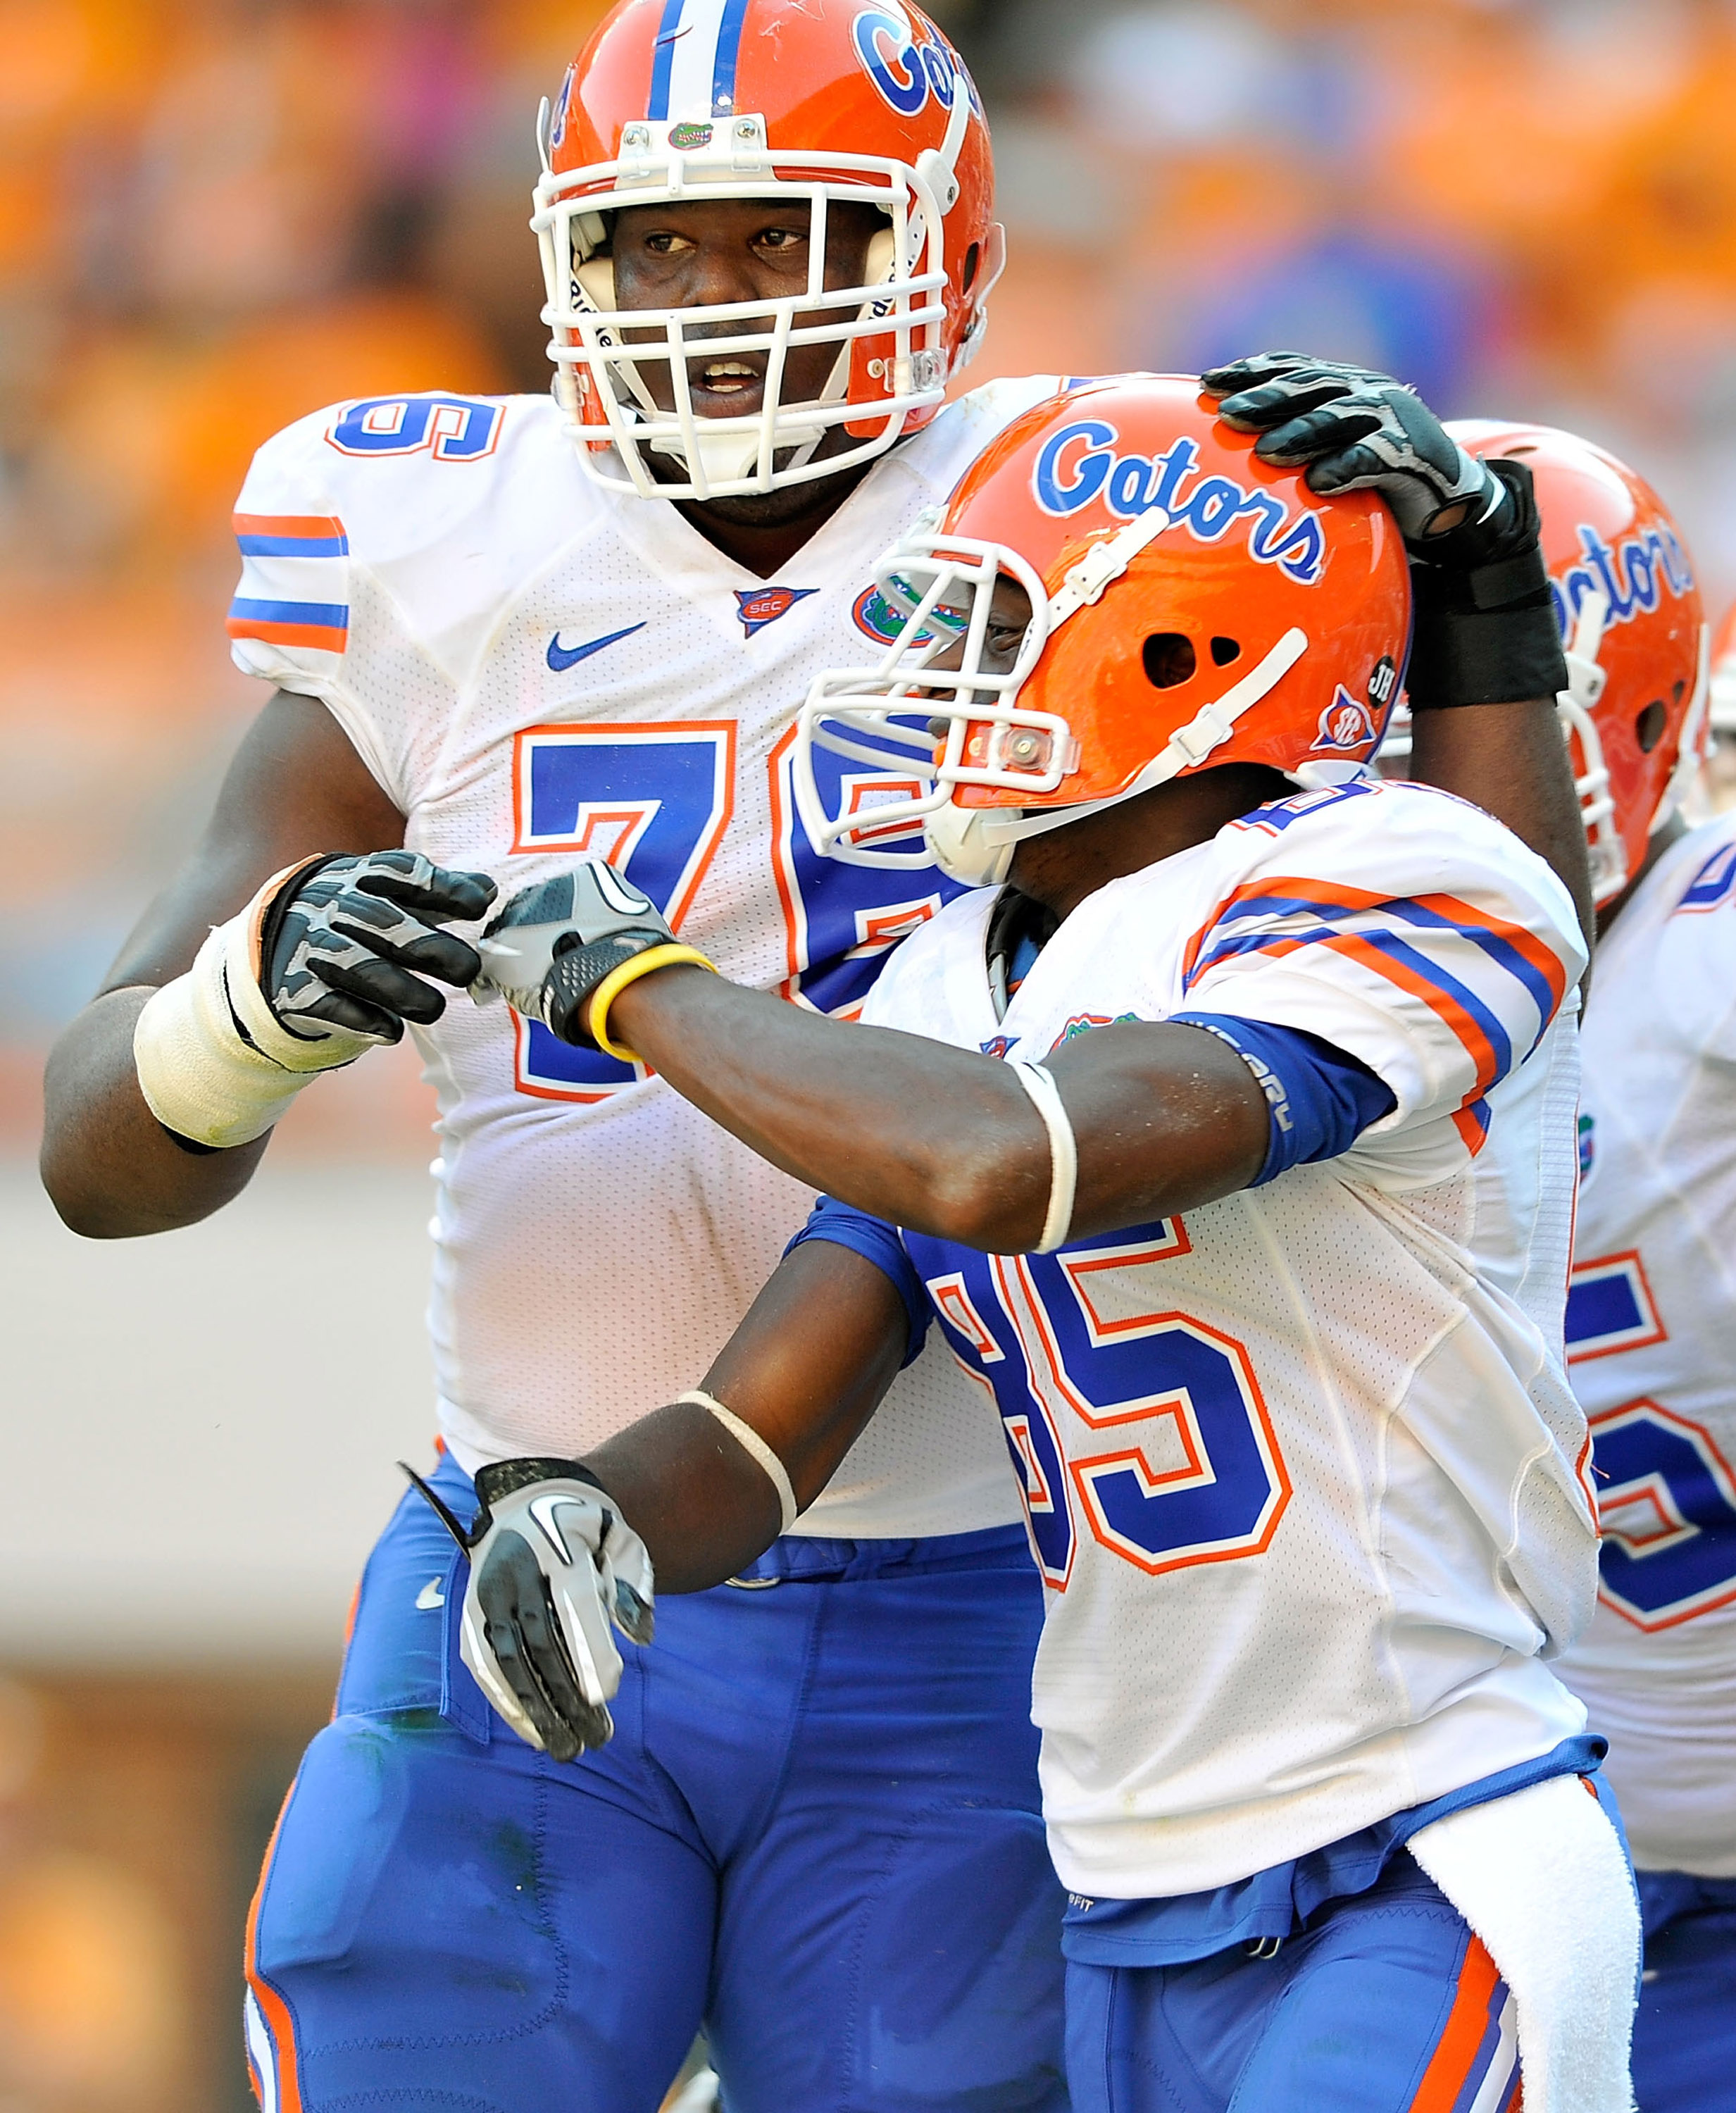 KNOXVILLE, TN - SEPTEMBER 18:  Frankie Hammond #85 celebrates with teammate Marcus Gilbert #76 of the Florida Gators after scoring a touchdown aganst the Tennessee Volunteers at Neyland Stadium on September 18, 2010 in Knoxville, Tennessee. Florida won 31